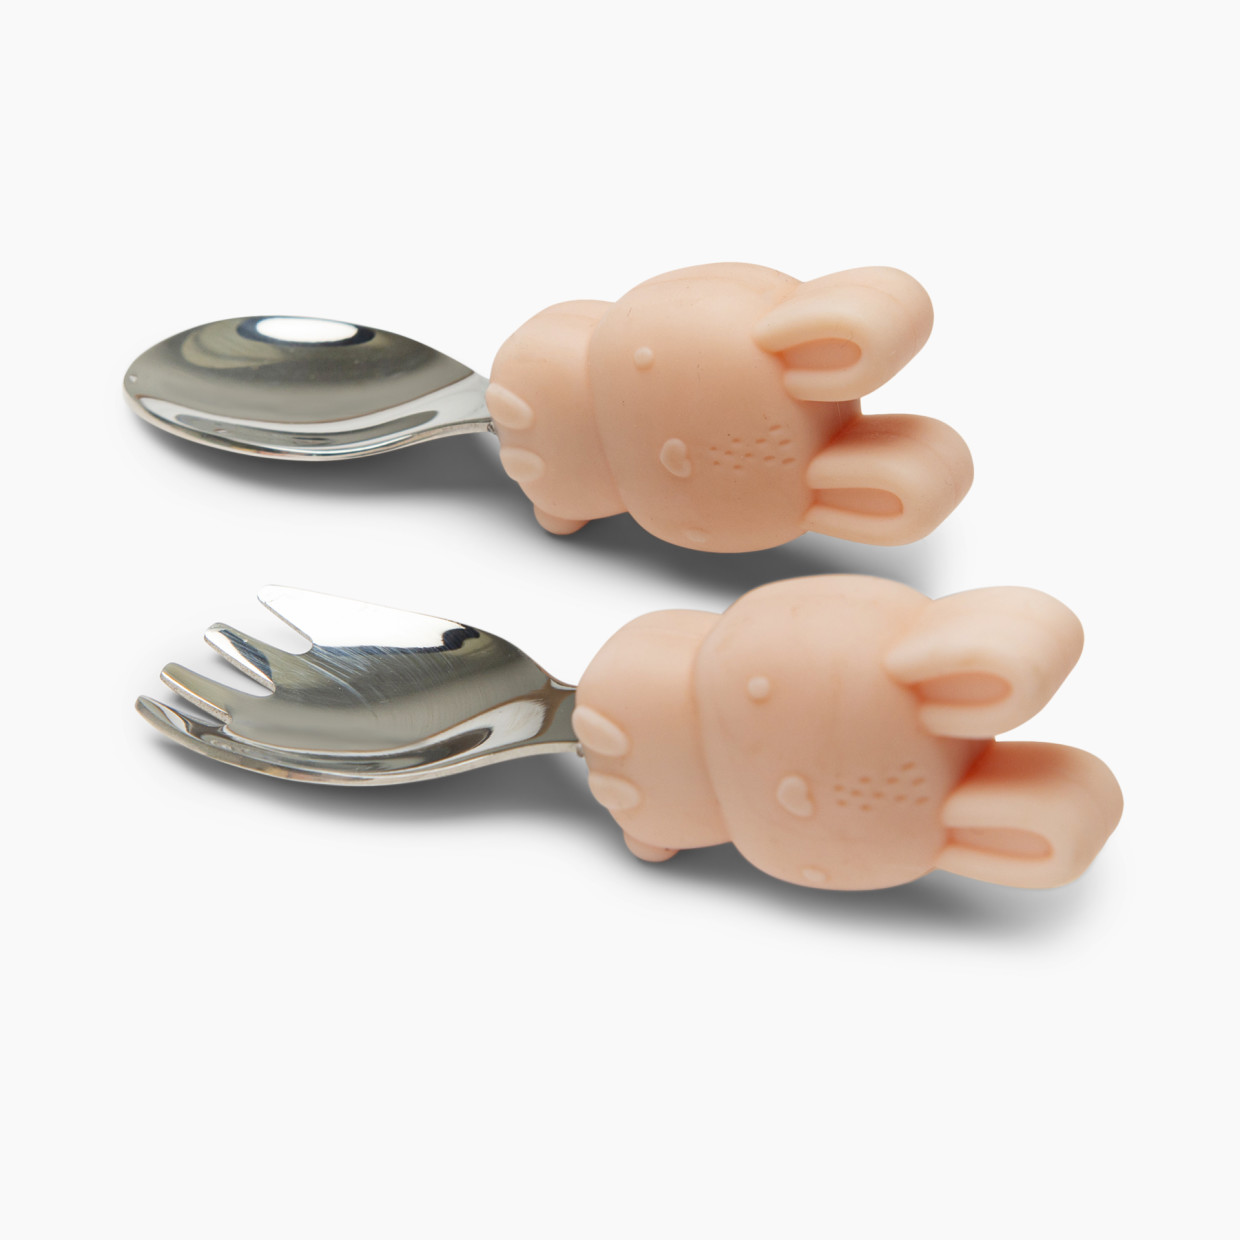 Loulou Lollipop Born to be Wild Learning Spoon and Fork Set - Bunny.